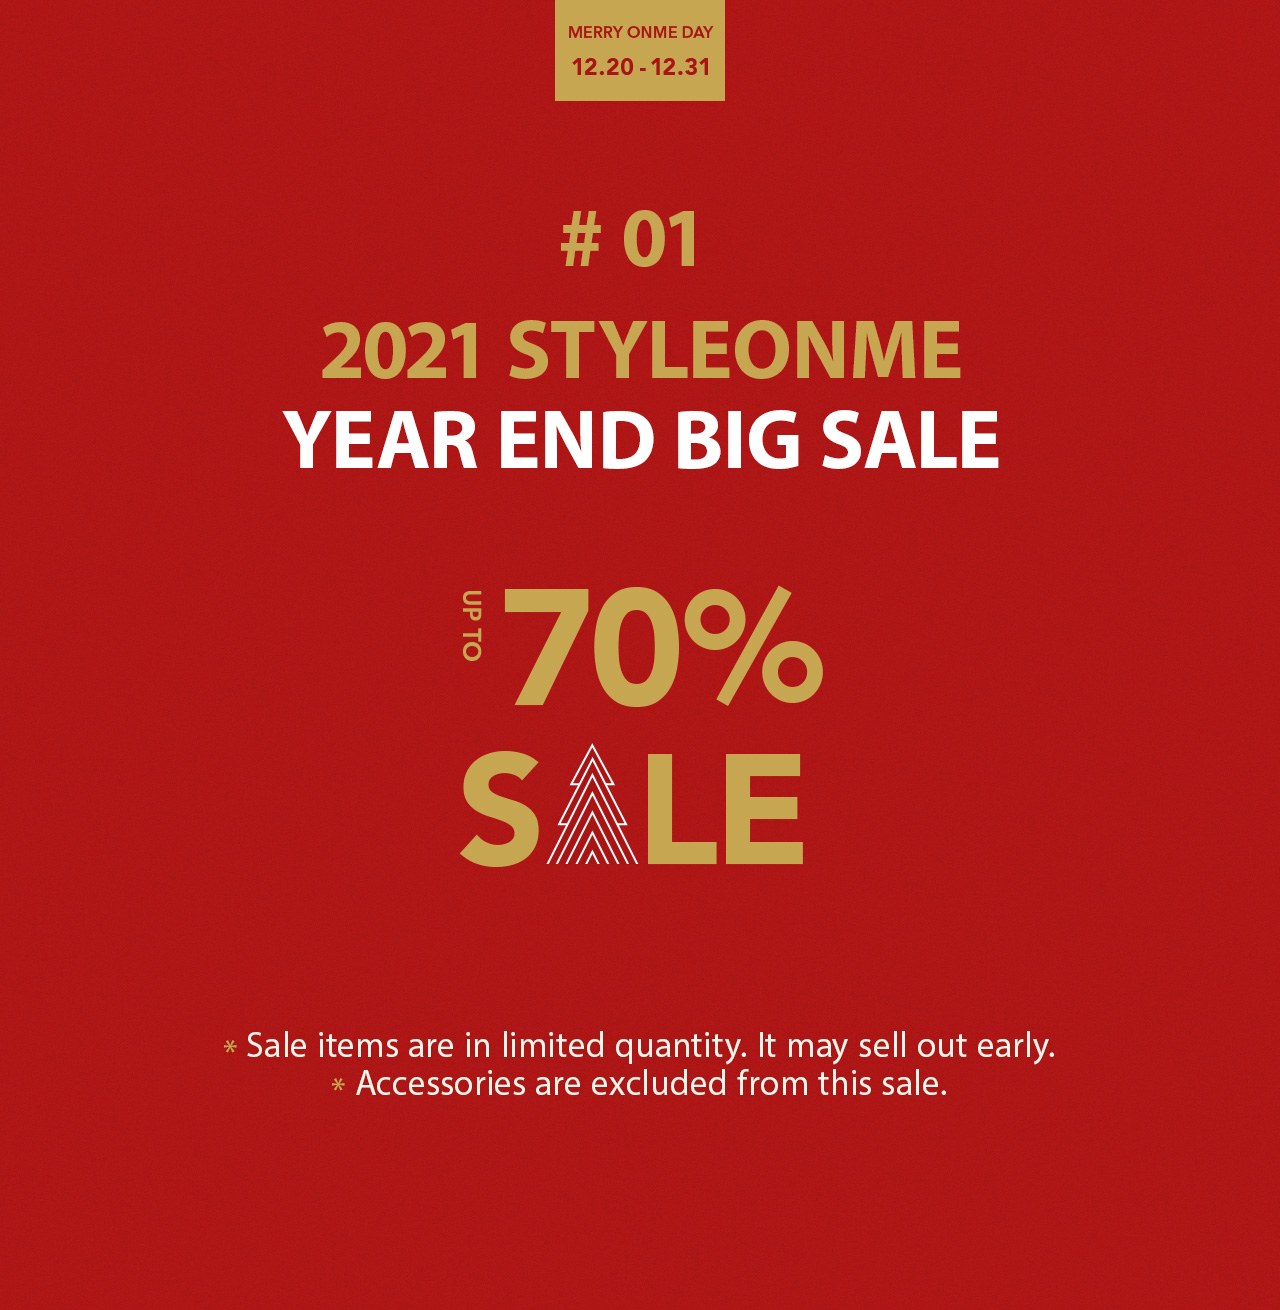 MERRY ONME YEAR-END BIG SALE